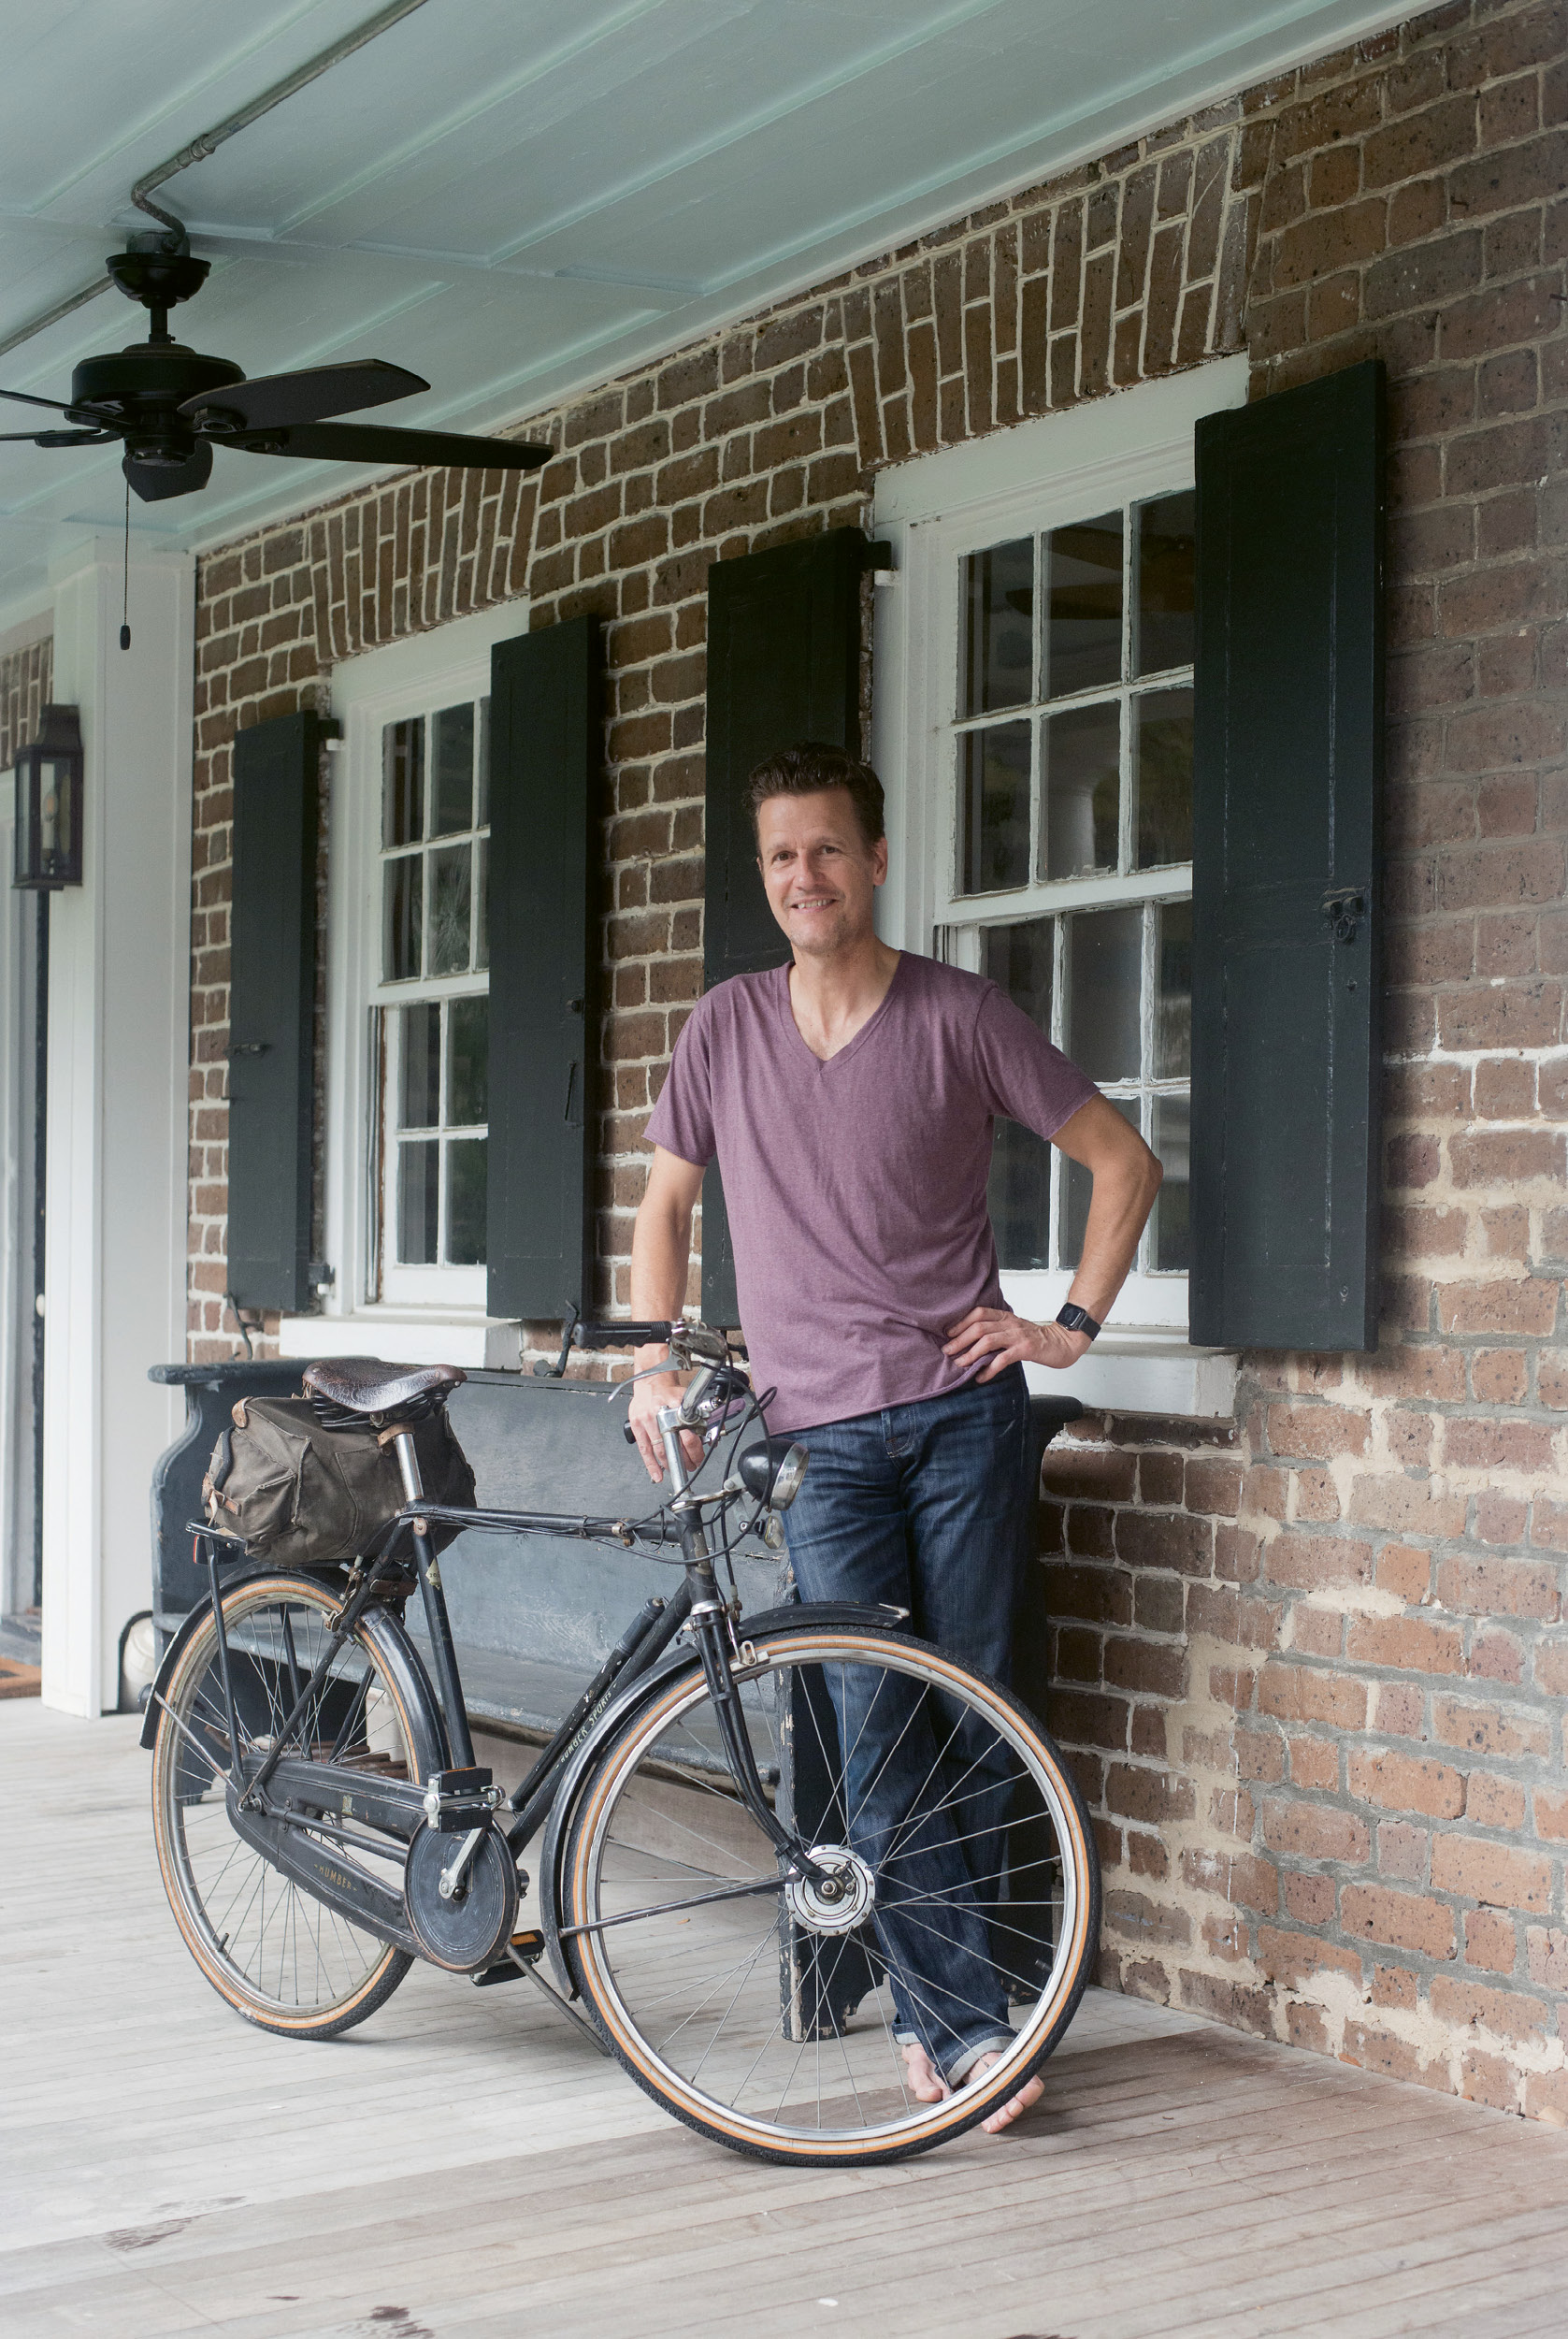 2:45 p.m. - Top Speed: “At home in California, I’m super active—I bike 15 miles a day and play sports with my kids,” Nuttall says. “Here, I ride this bike everywhere; it’s by far the best way to get around Charleston. Our head stage manager, Walter Crocker, has a whole fleet of bikes that he loans out, and for the last 15 years, he’s given me this 1953 English three-speed.”